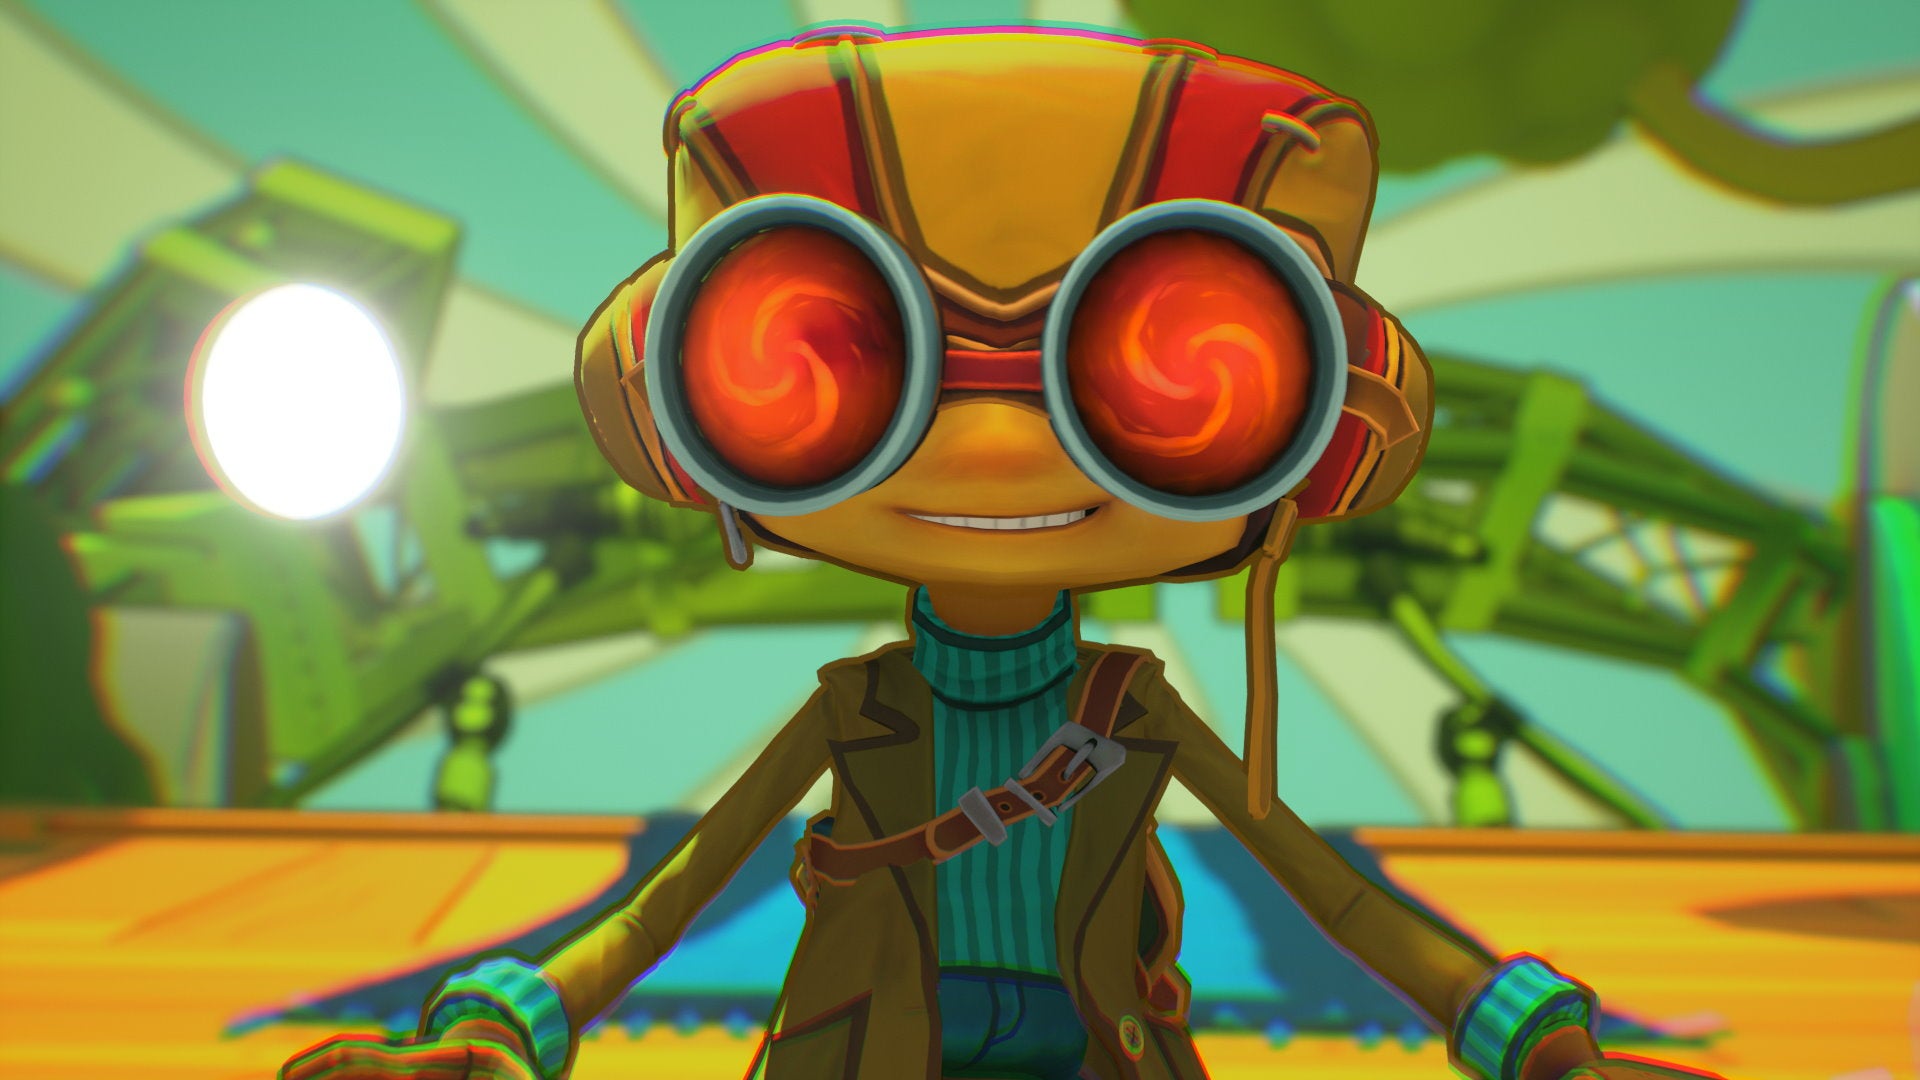 Raz smiles against a colorful background in Psychonauts 2